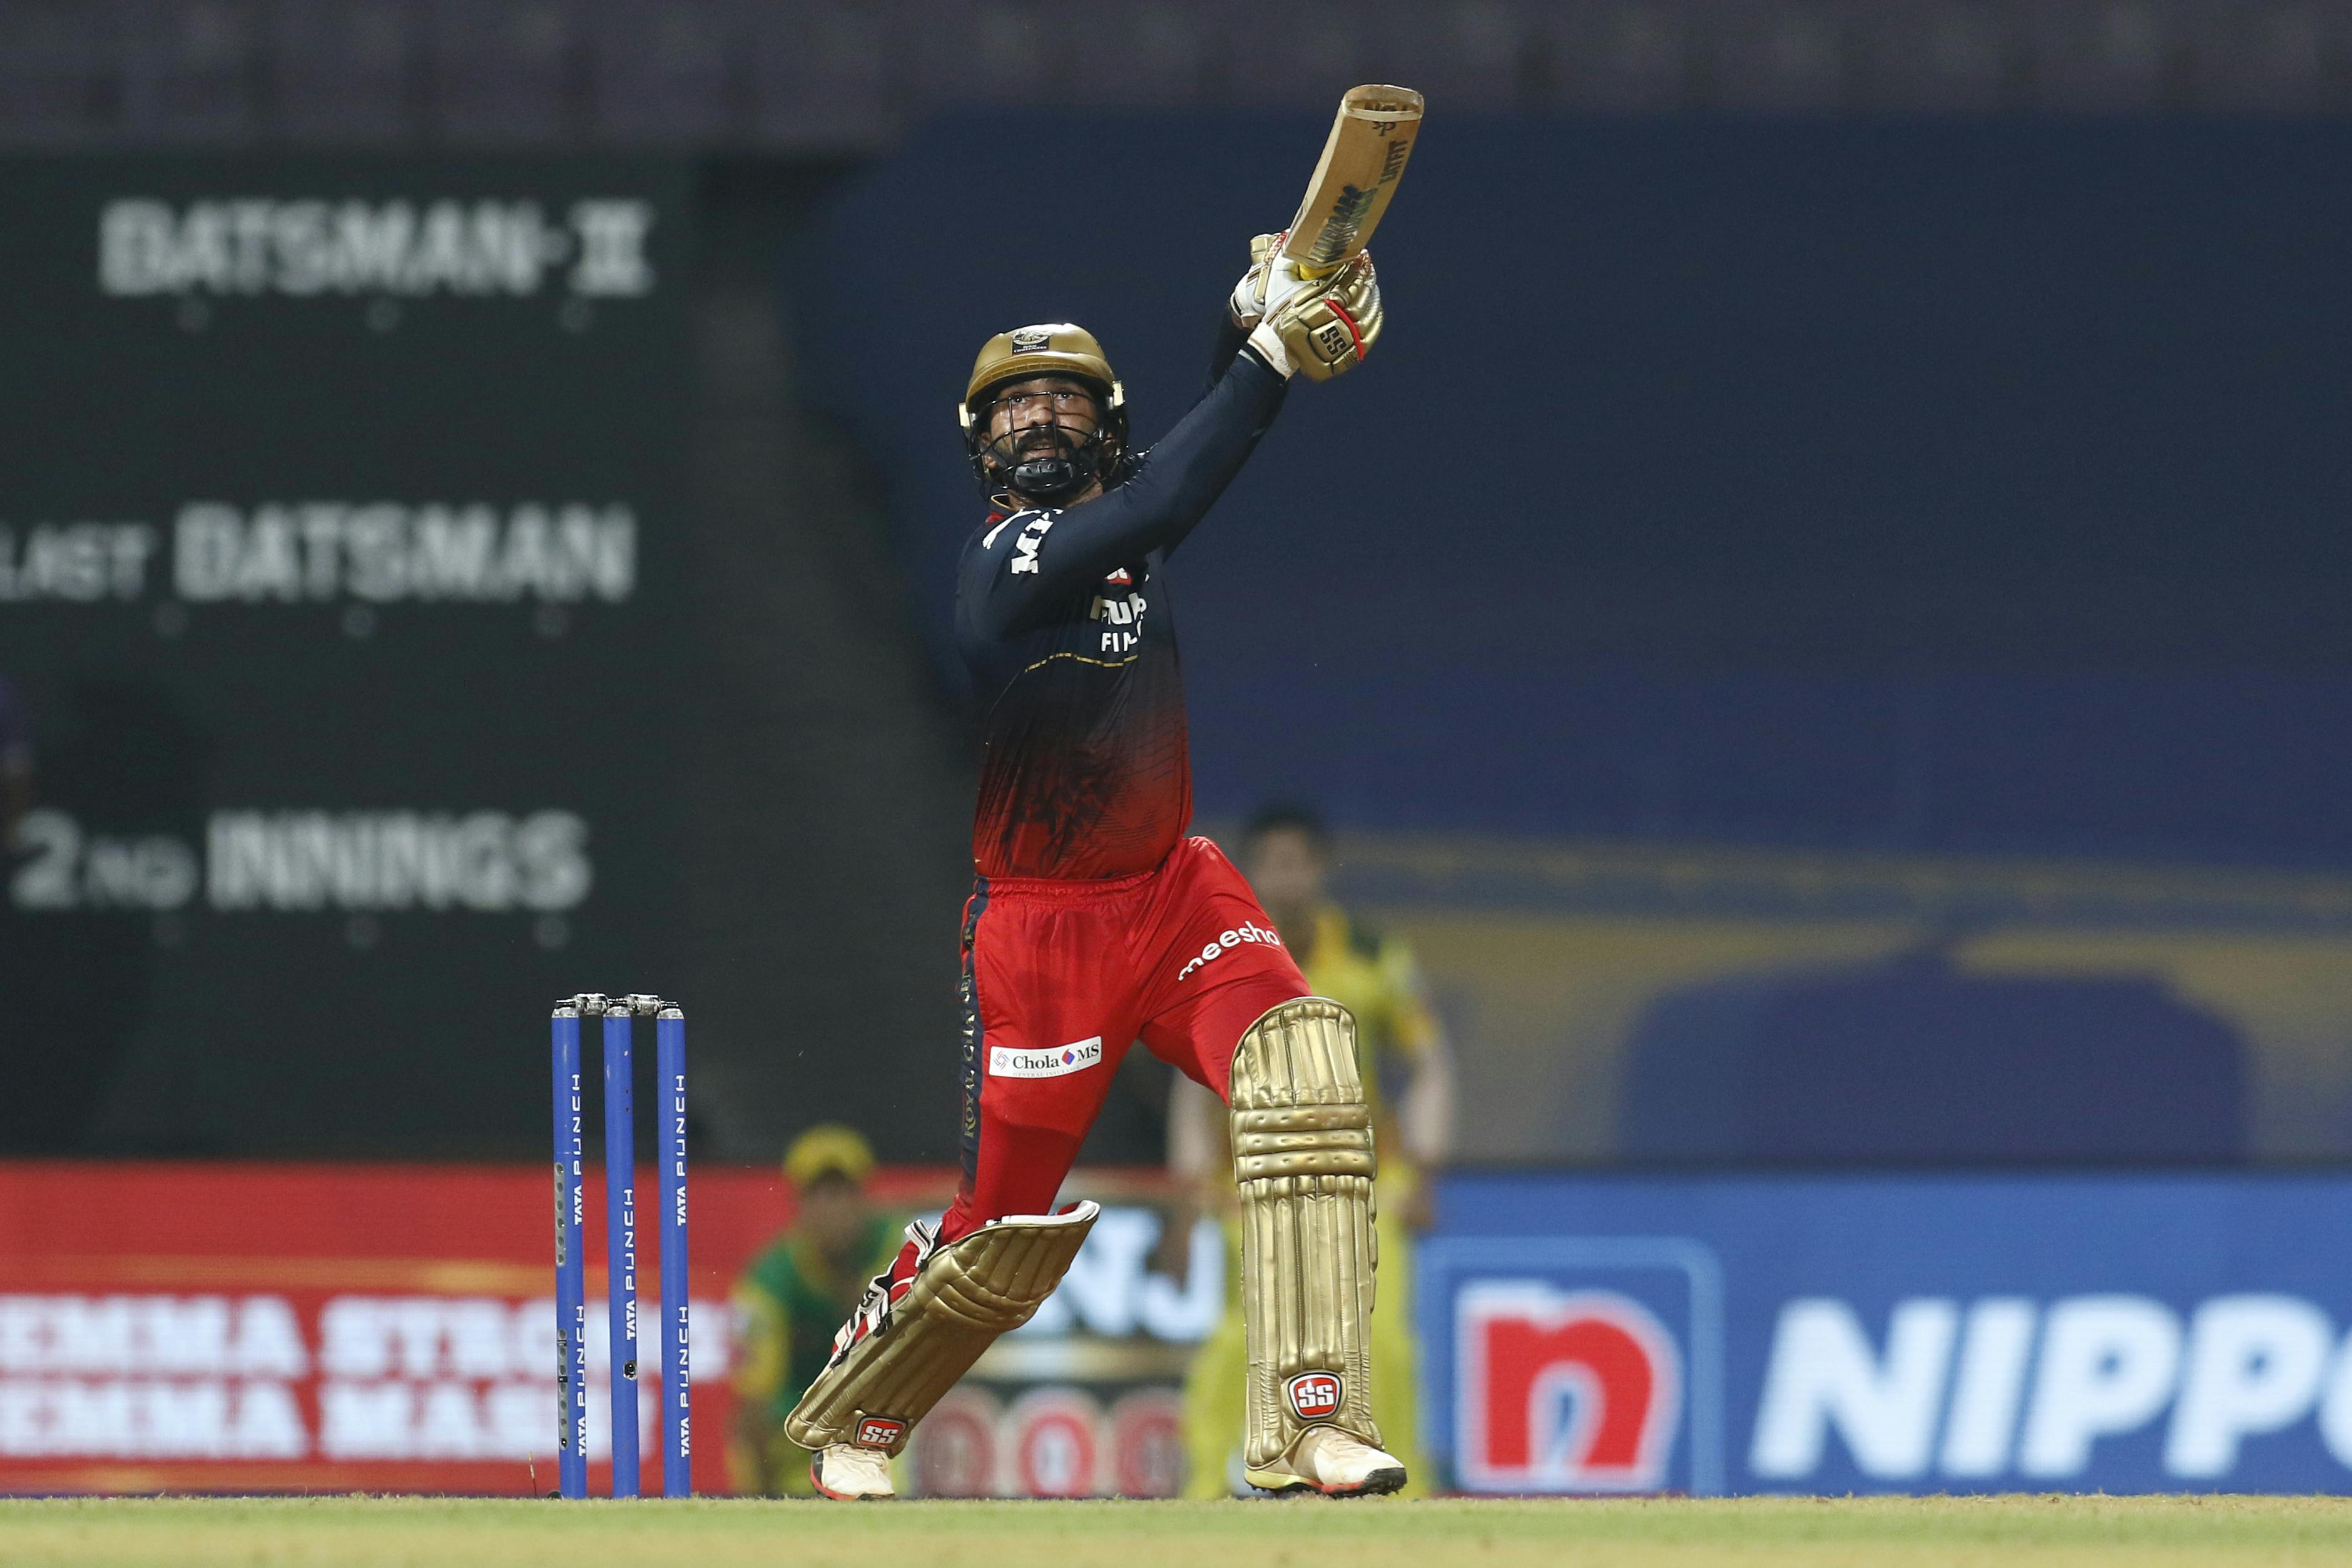 RCB relying a bit too much on Karthik, need top-order to score big Dirk Nannes Exclusive